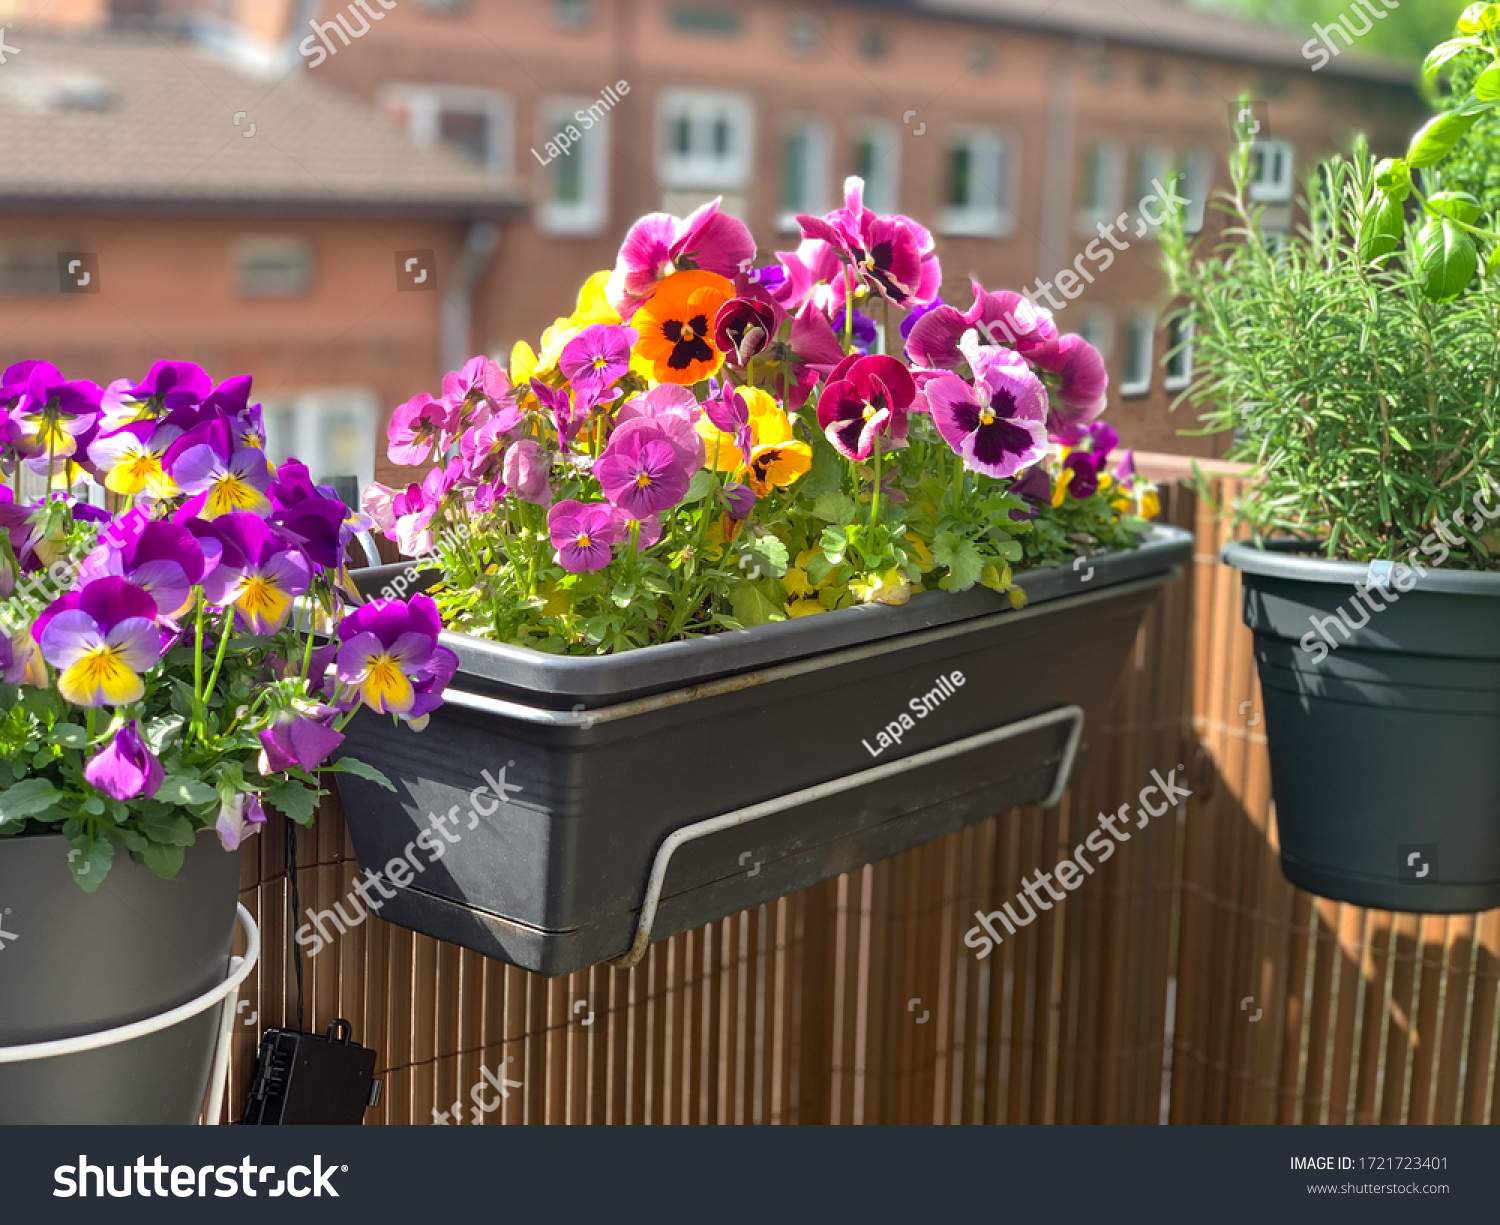 Beautiful bright heartsease pansies flowers in vibrant purple, violet, and yellow color in a long flower pot hanging on the balcony fence, spring beautiful balcony flowers high angle view #1721723401